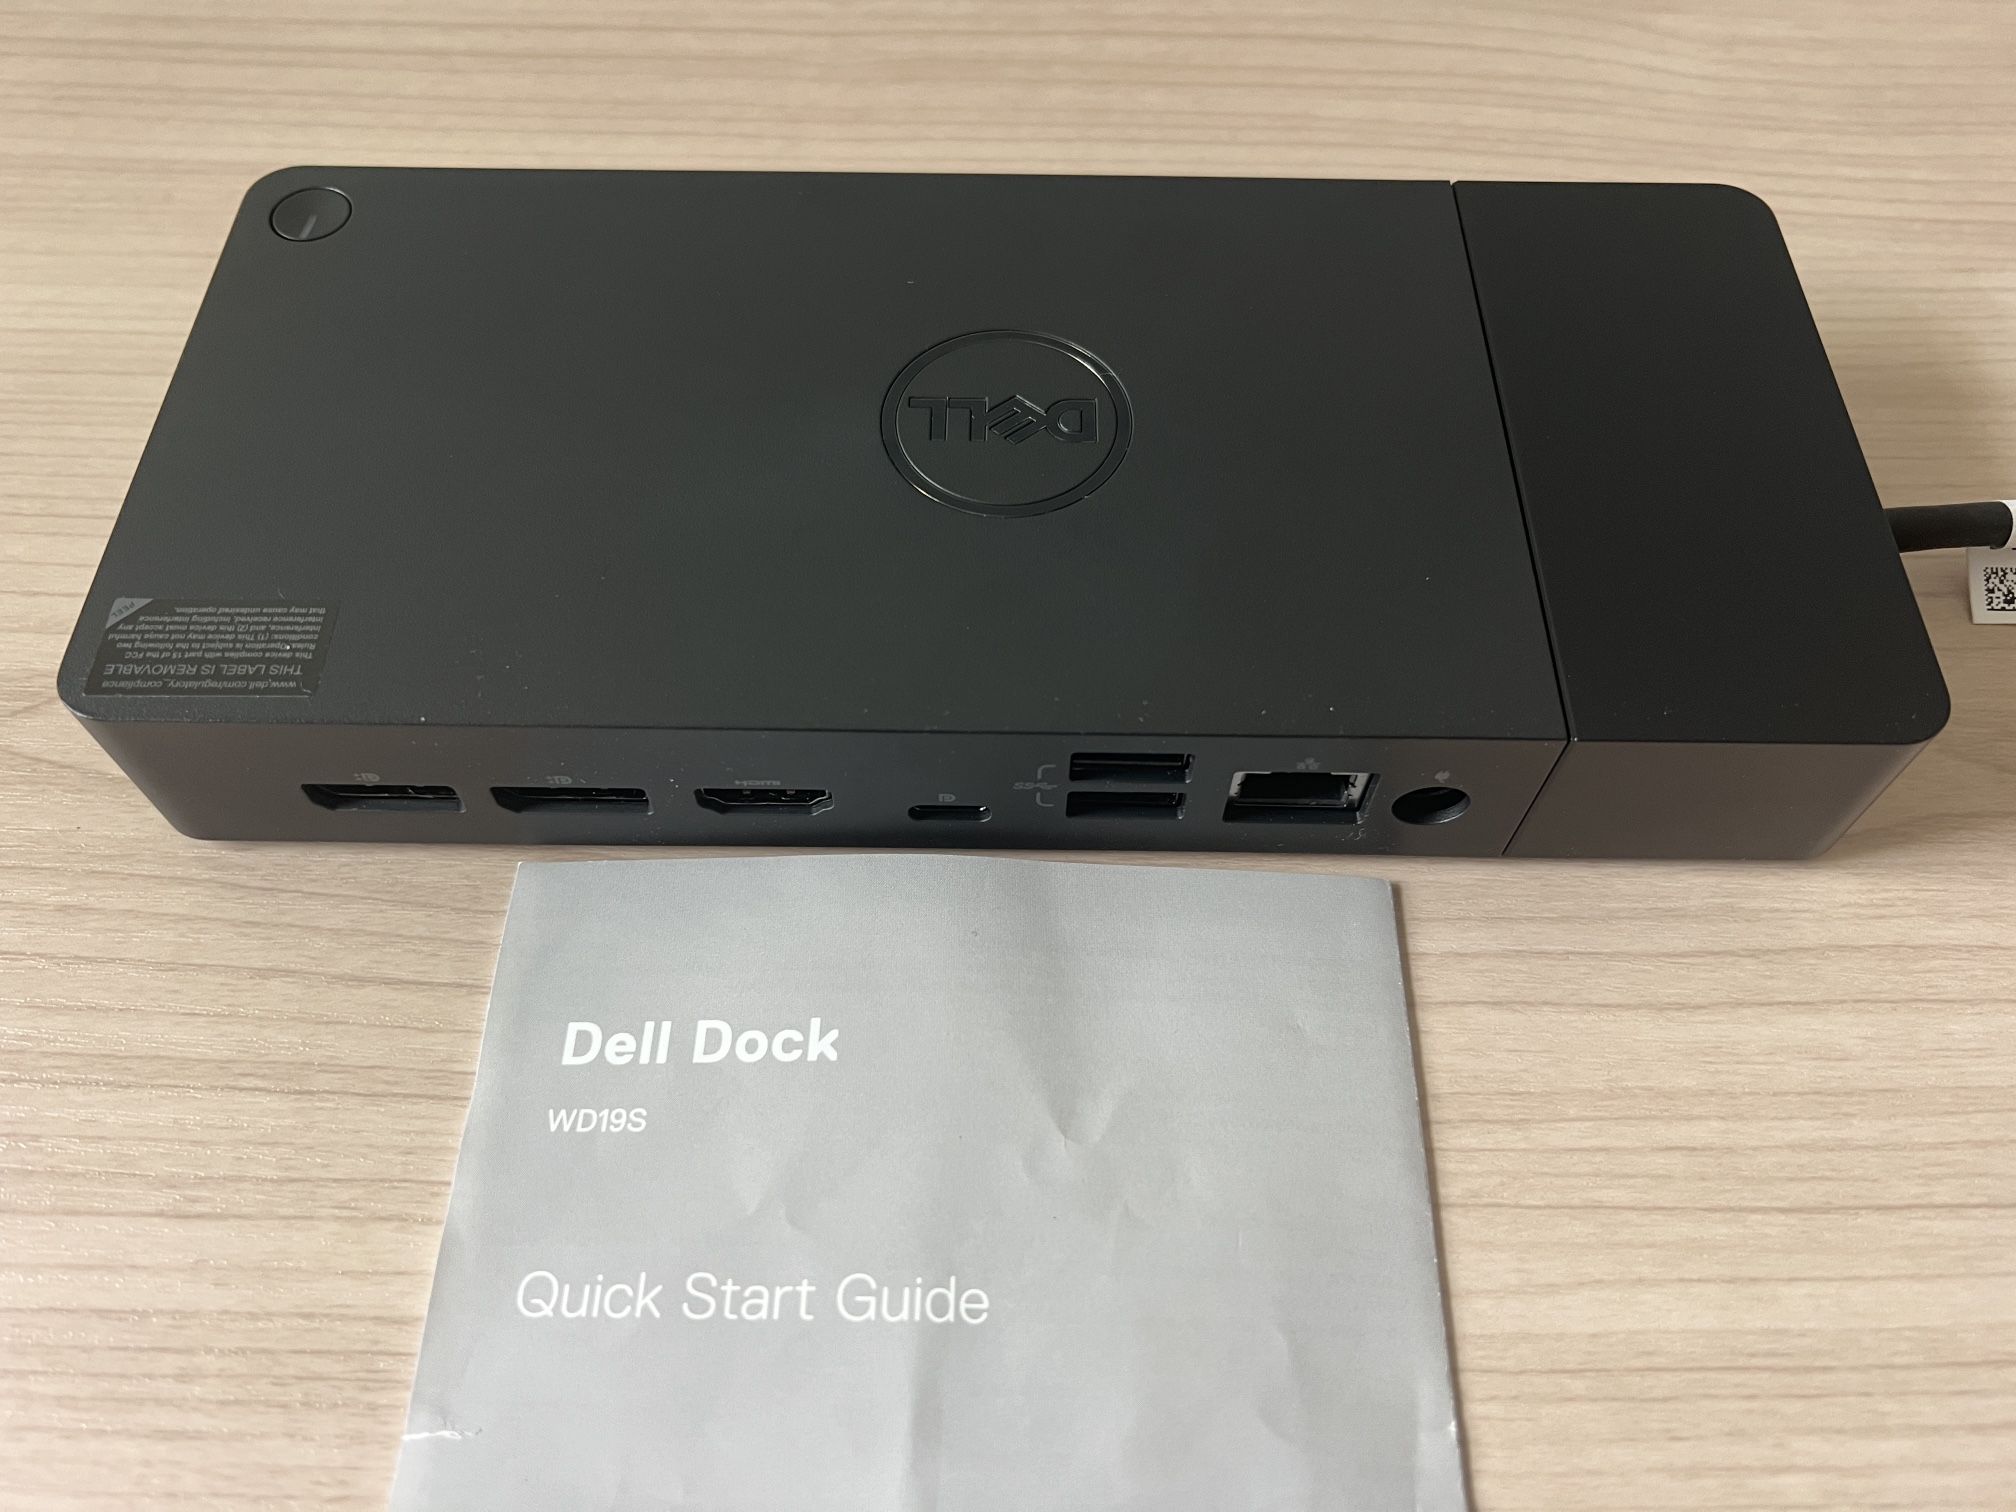 Dell Dock WD19S USB-C 180W Power Delivery. Never used. Open box.